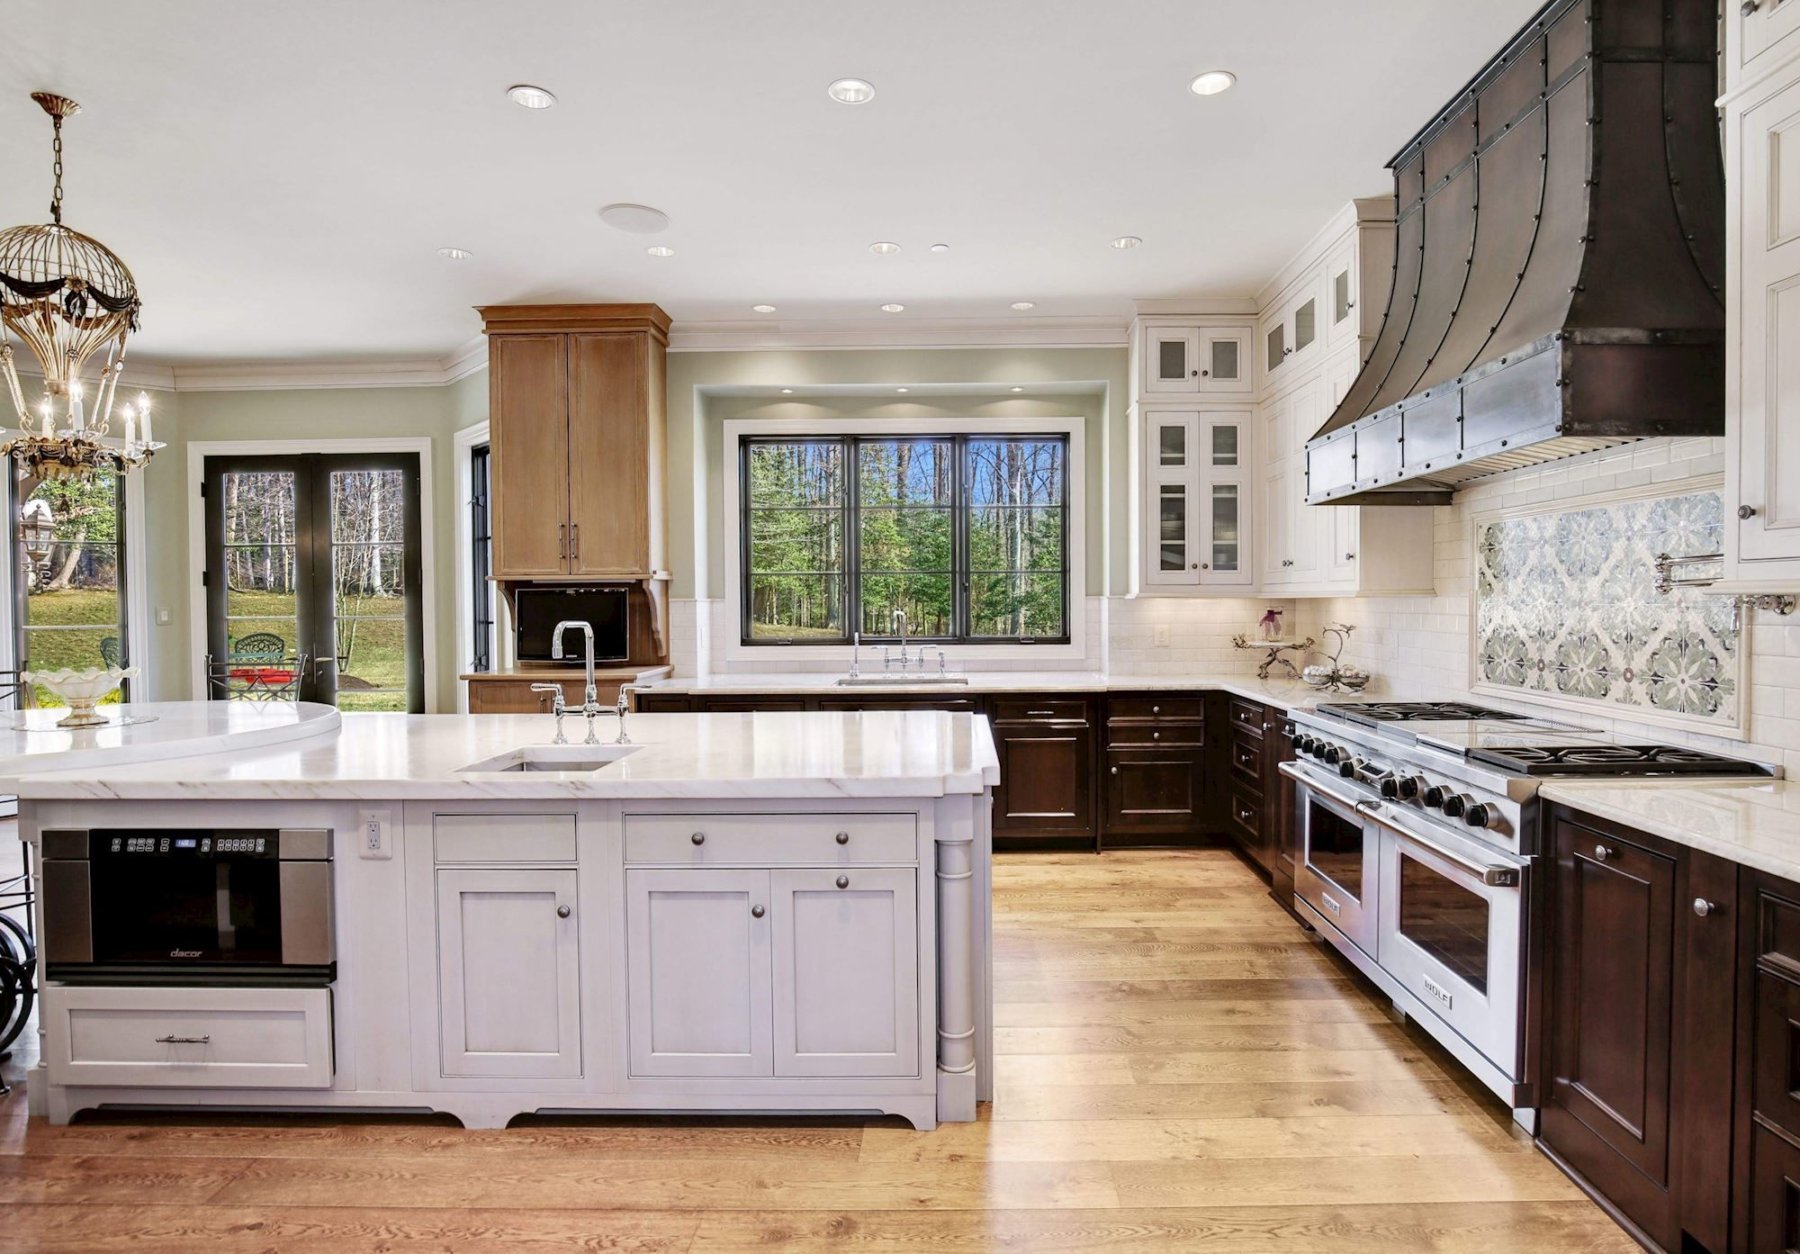 The top-of-the-line kitchen. (Courtesy Washington Fine Properties)